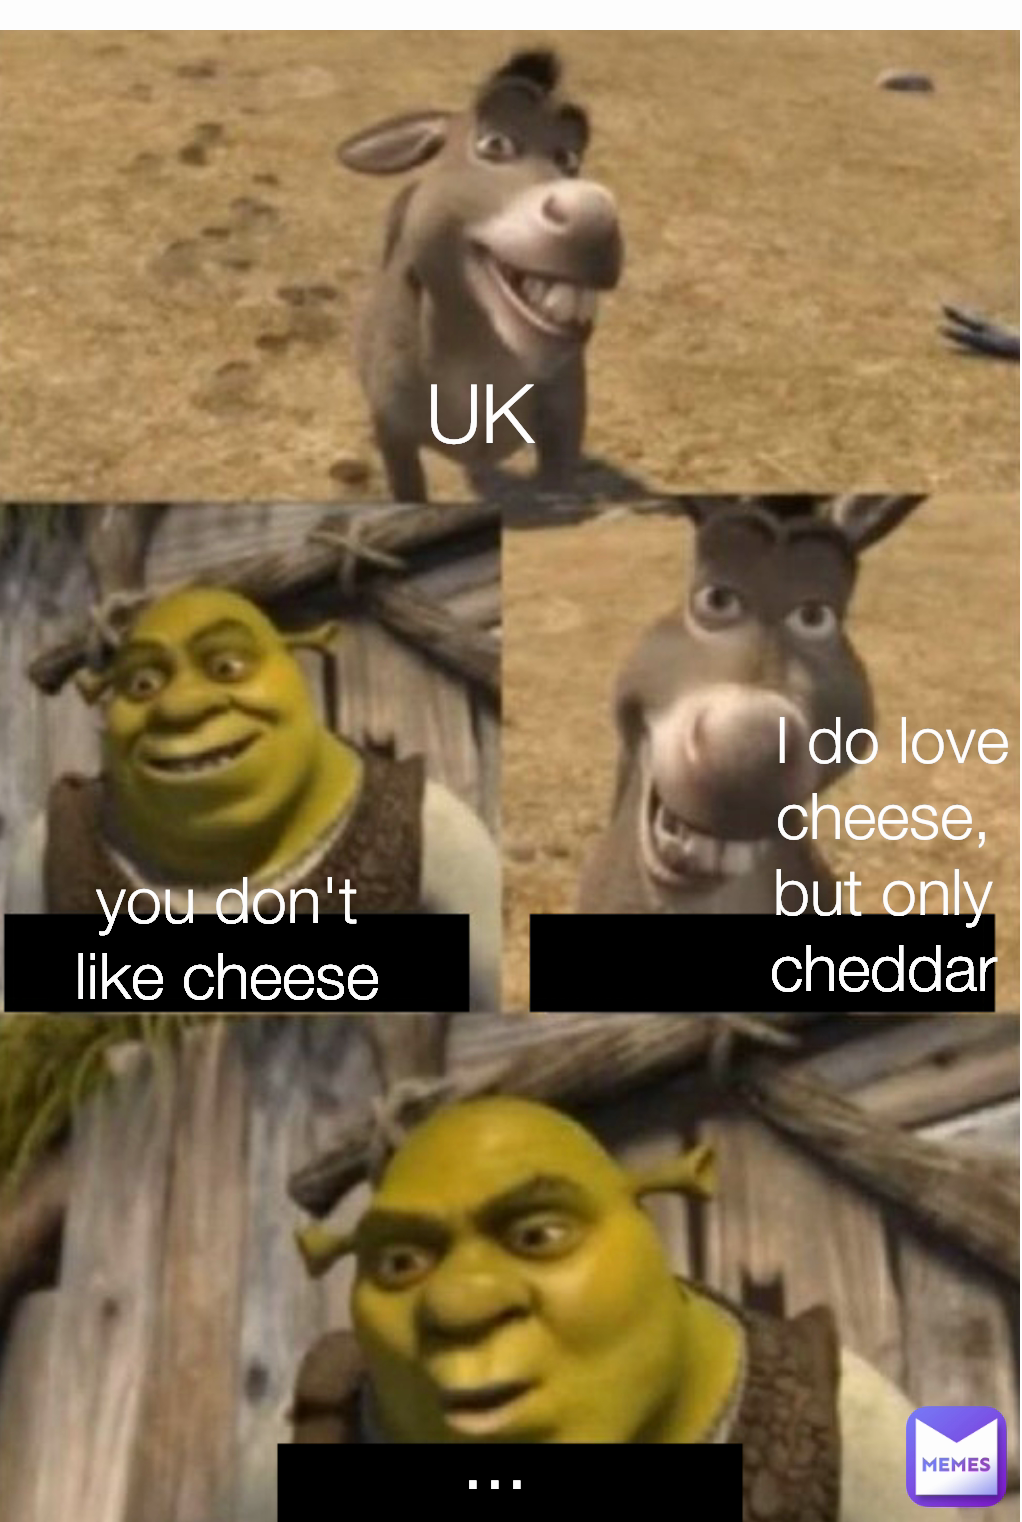 you don't like cheese ... UK I do love cheese, but only cheddar |  @..meme | Memes